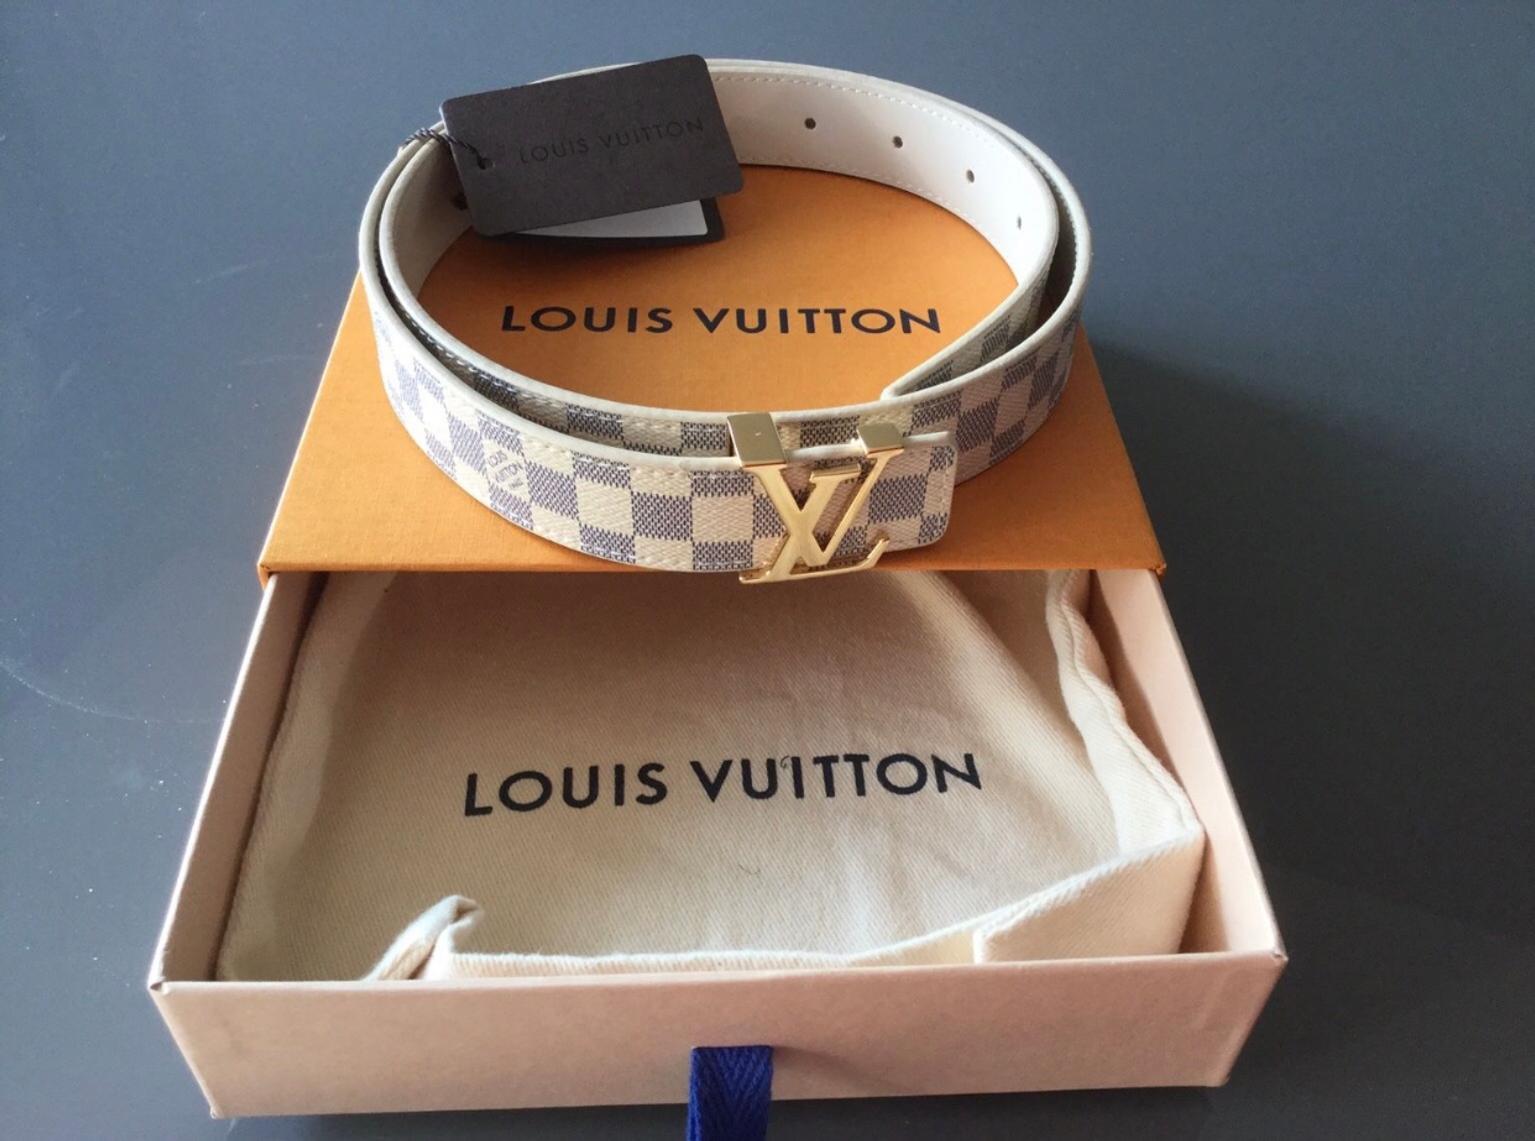 Brand new Louis Vuitton authentic belt £140 in CR0 London for £140.00 for sale | Shpock